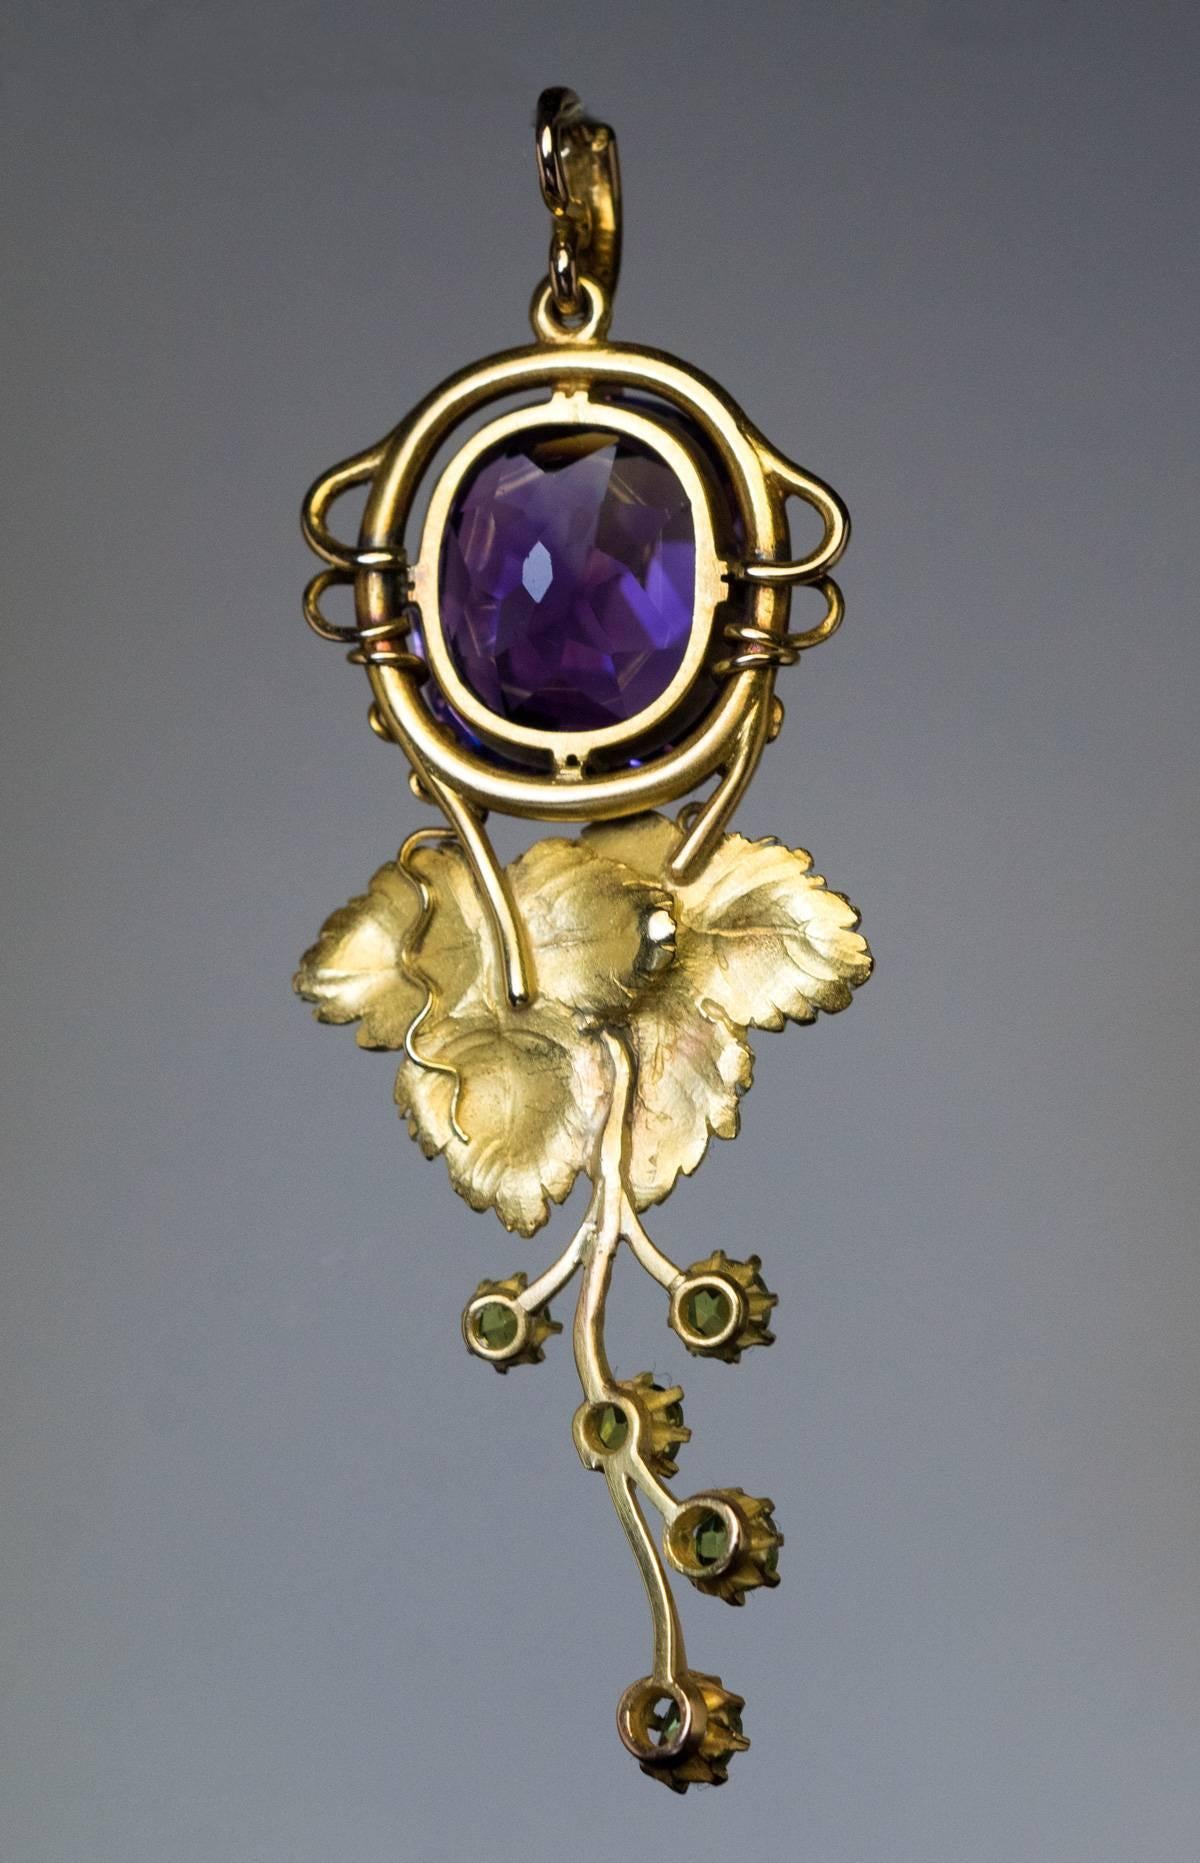 Made between 1908 and 1917
An antique Russian gold pendant is designed in Art Nouveau taste as a stylized grape vine with finely modeled green gold grape leaves. The pendant features a rare Siberian amethyst and five green demantoid garnets.
The